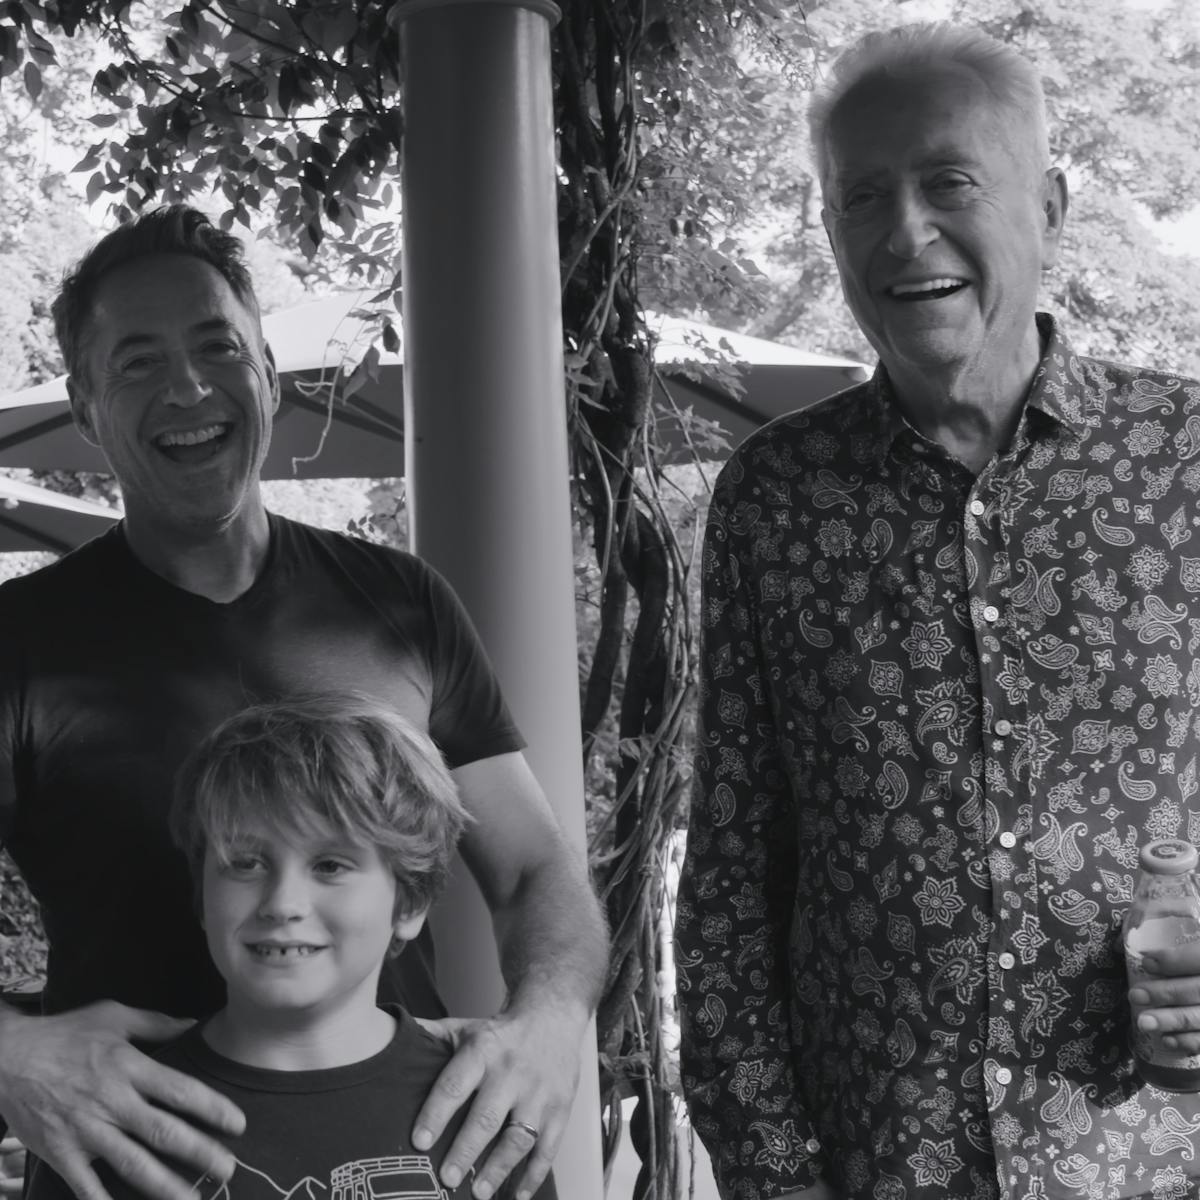 Robert Downey Jr., Exton, and Robert Downey Sr. stand together smiling in this black-and-white photo.